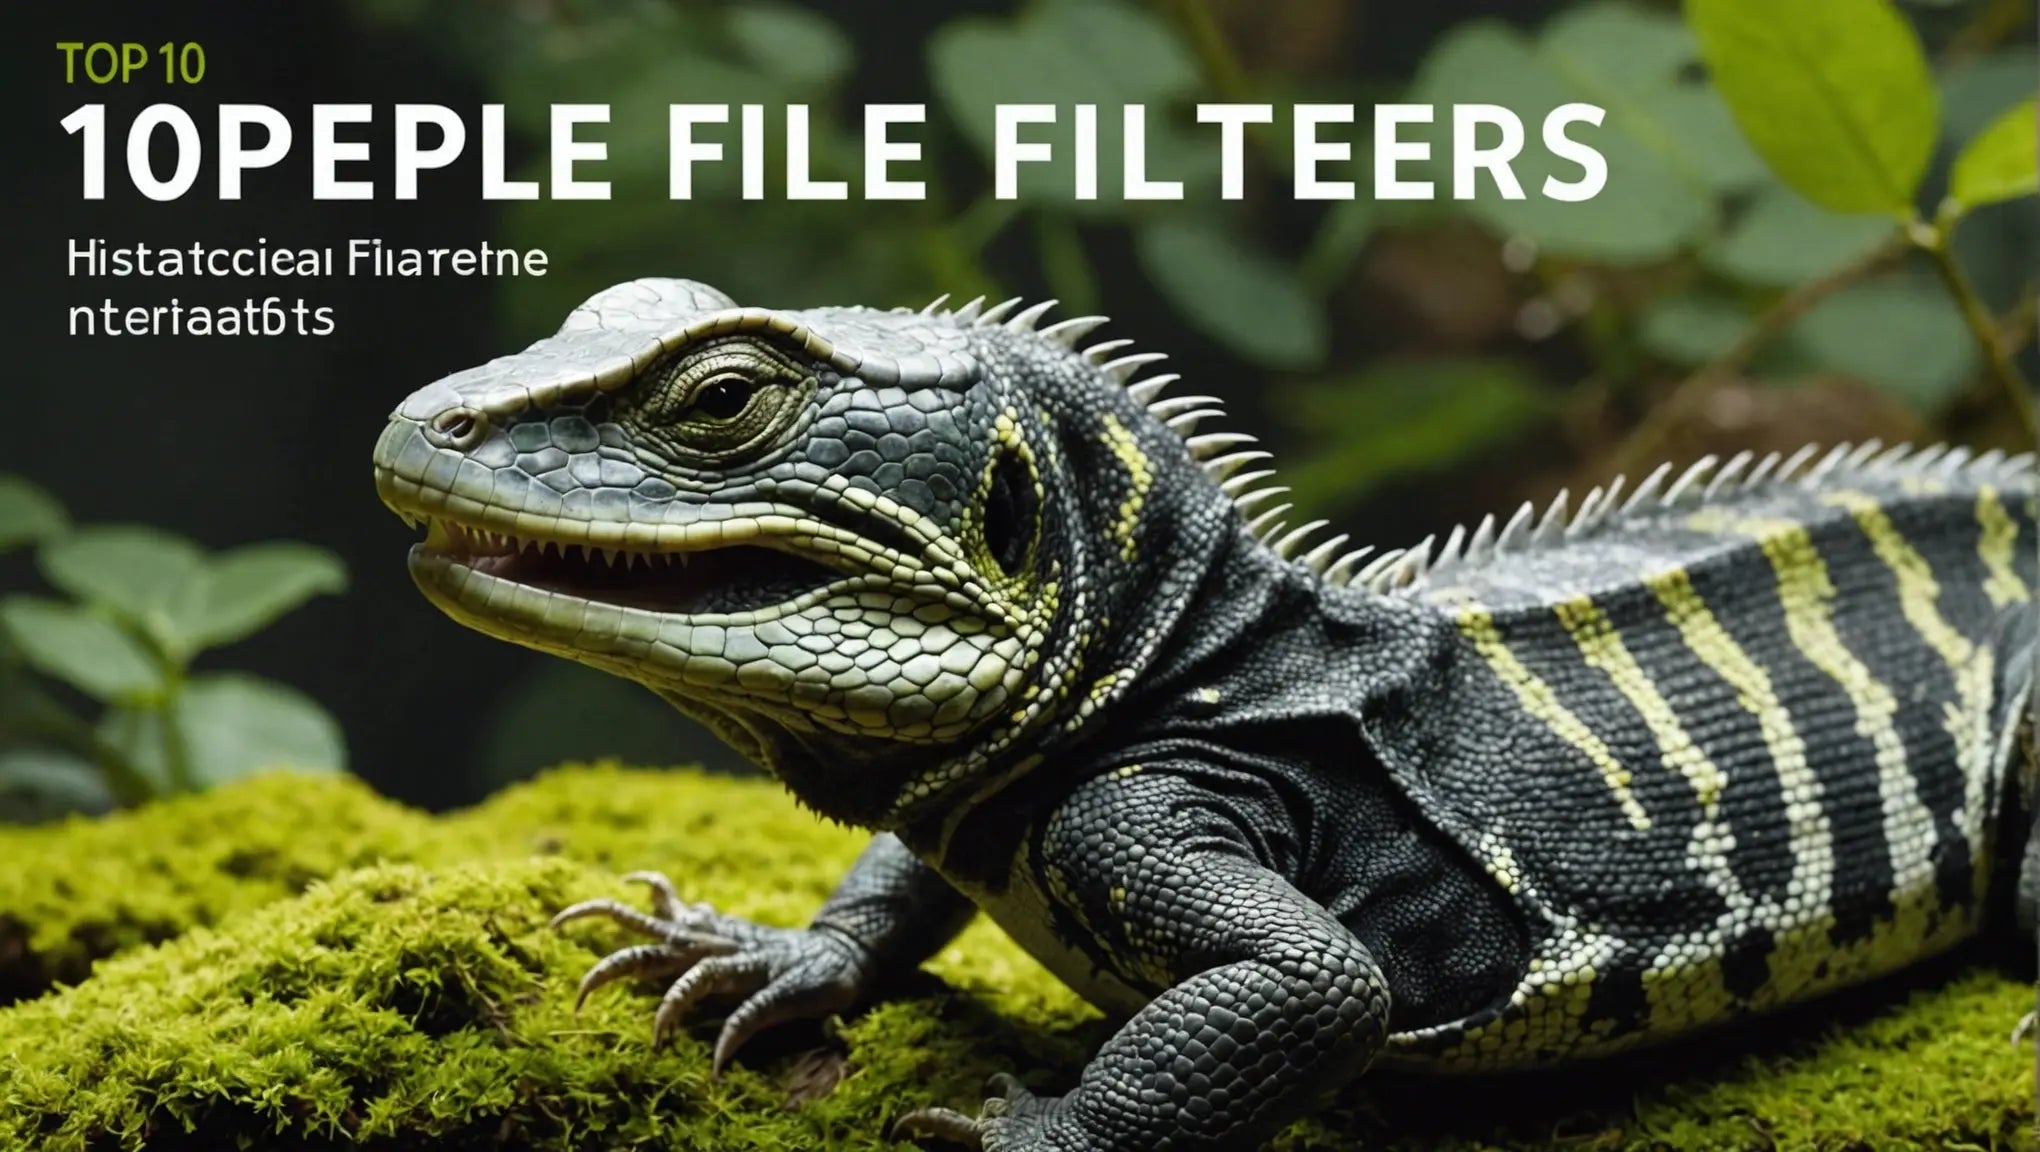 Top 10 Reptile Filters for a Clean and Healthy Habitat